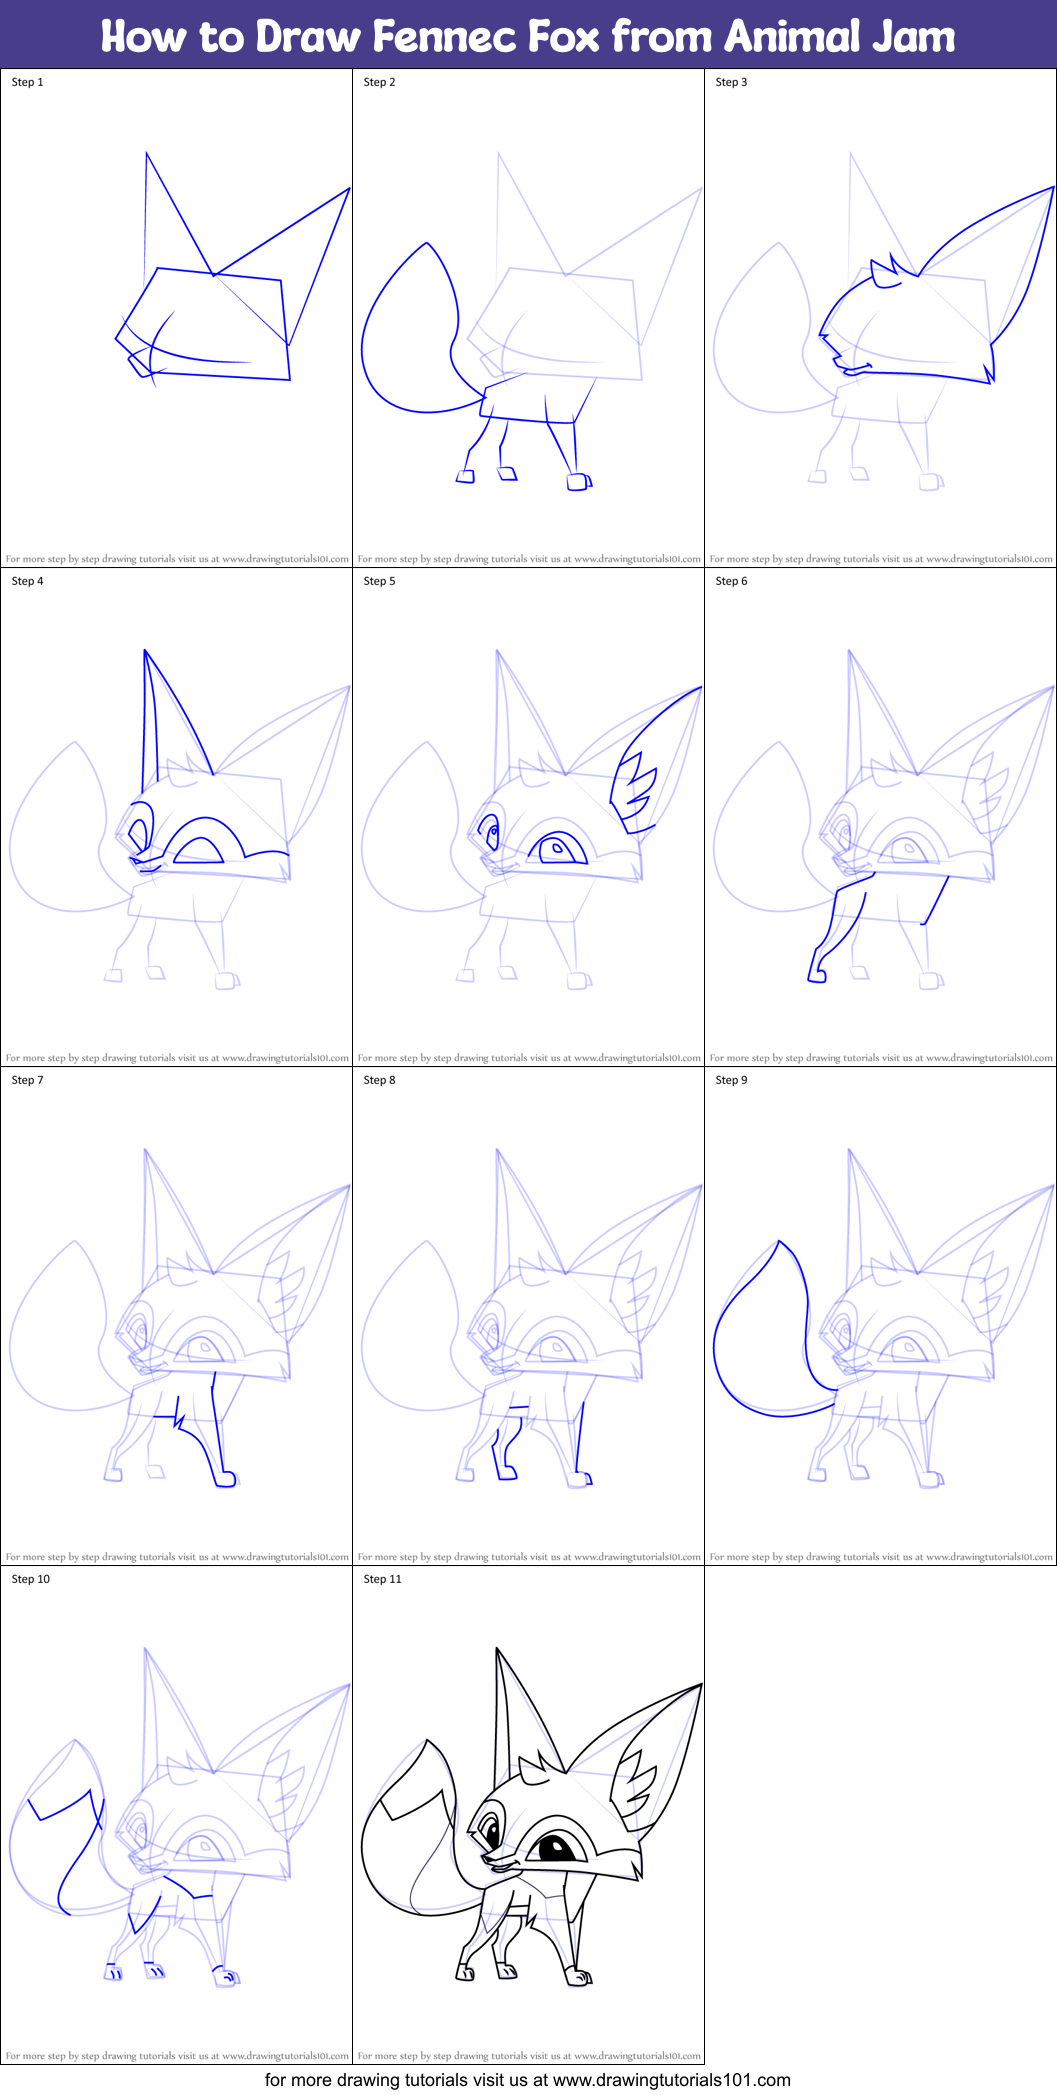 How to Draw Fennec Fox from Animal Jam printable step by step drawing